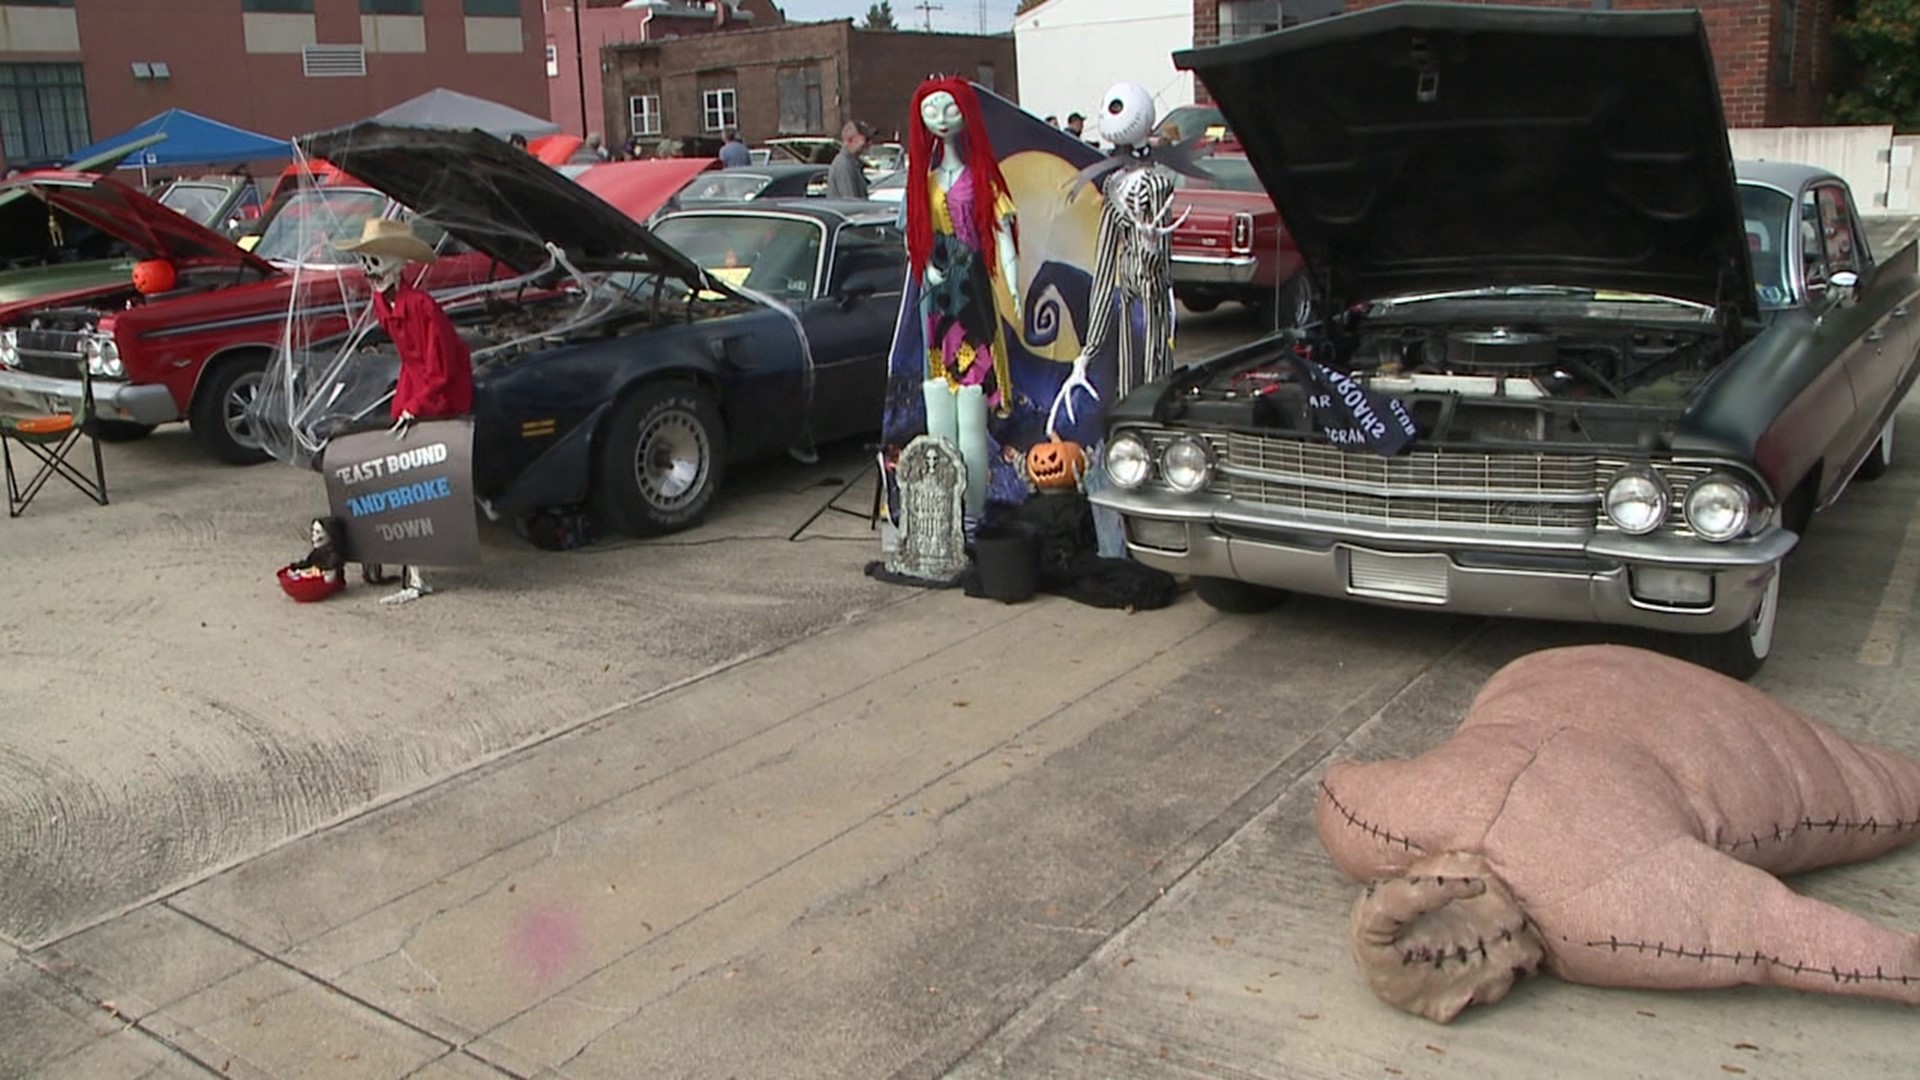 The car show was held at Hotel Anthracite in Carbondale Sunday afternoon.